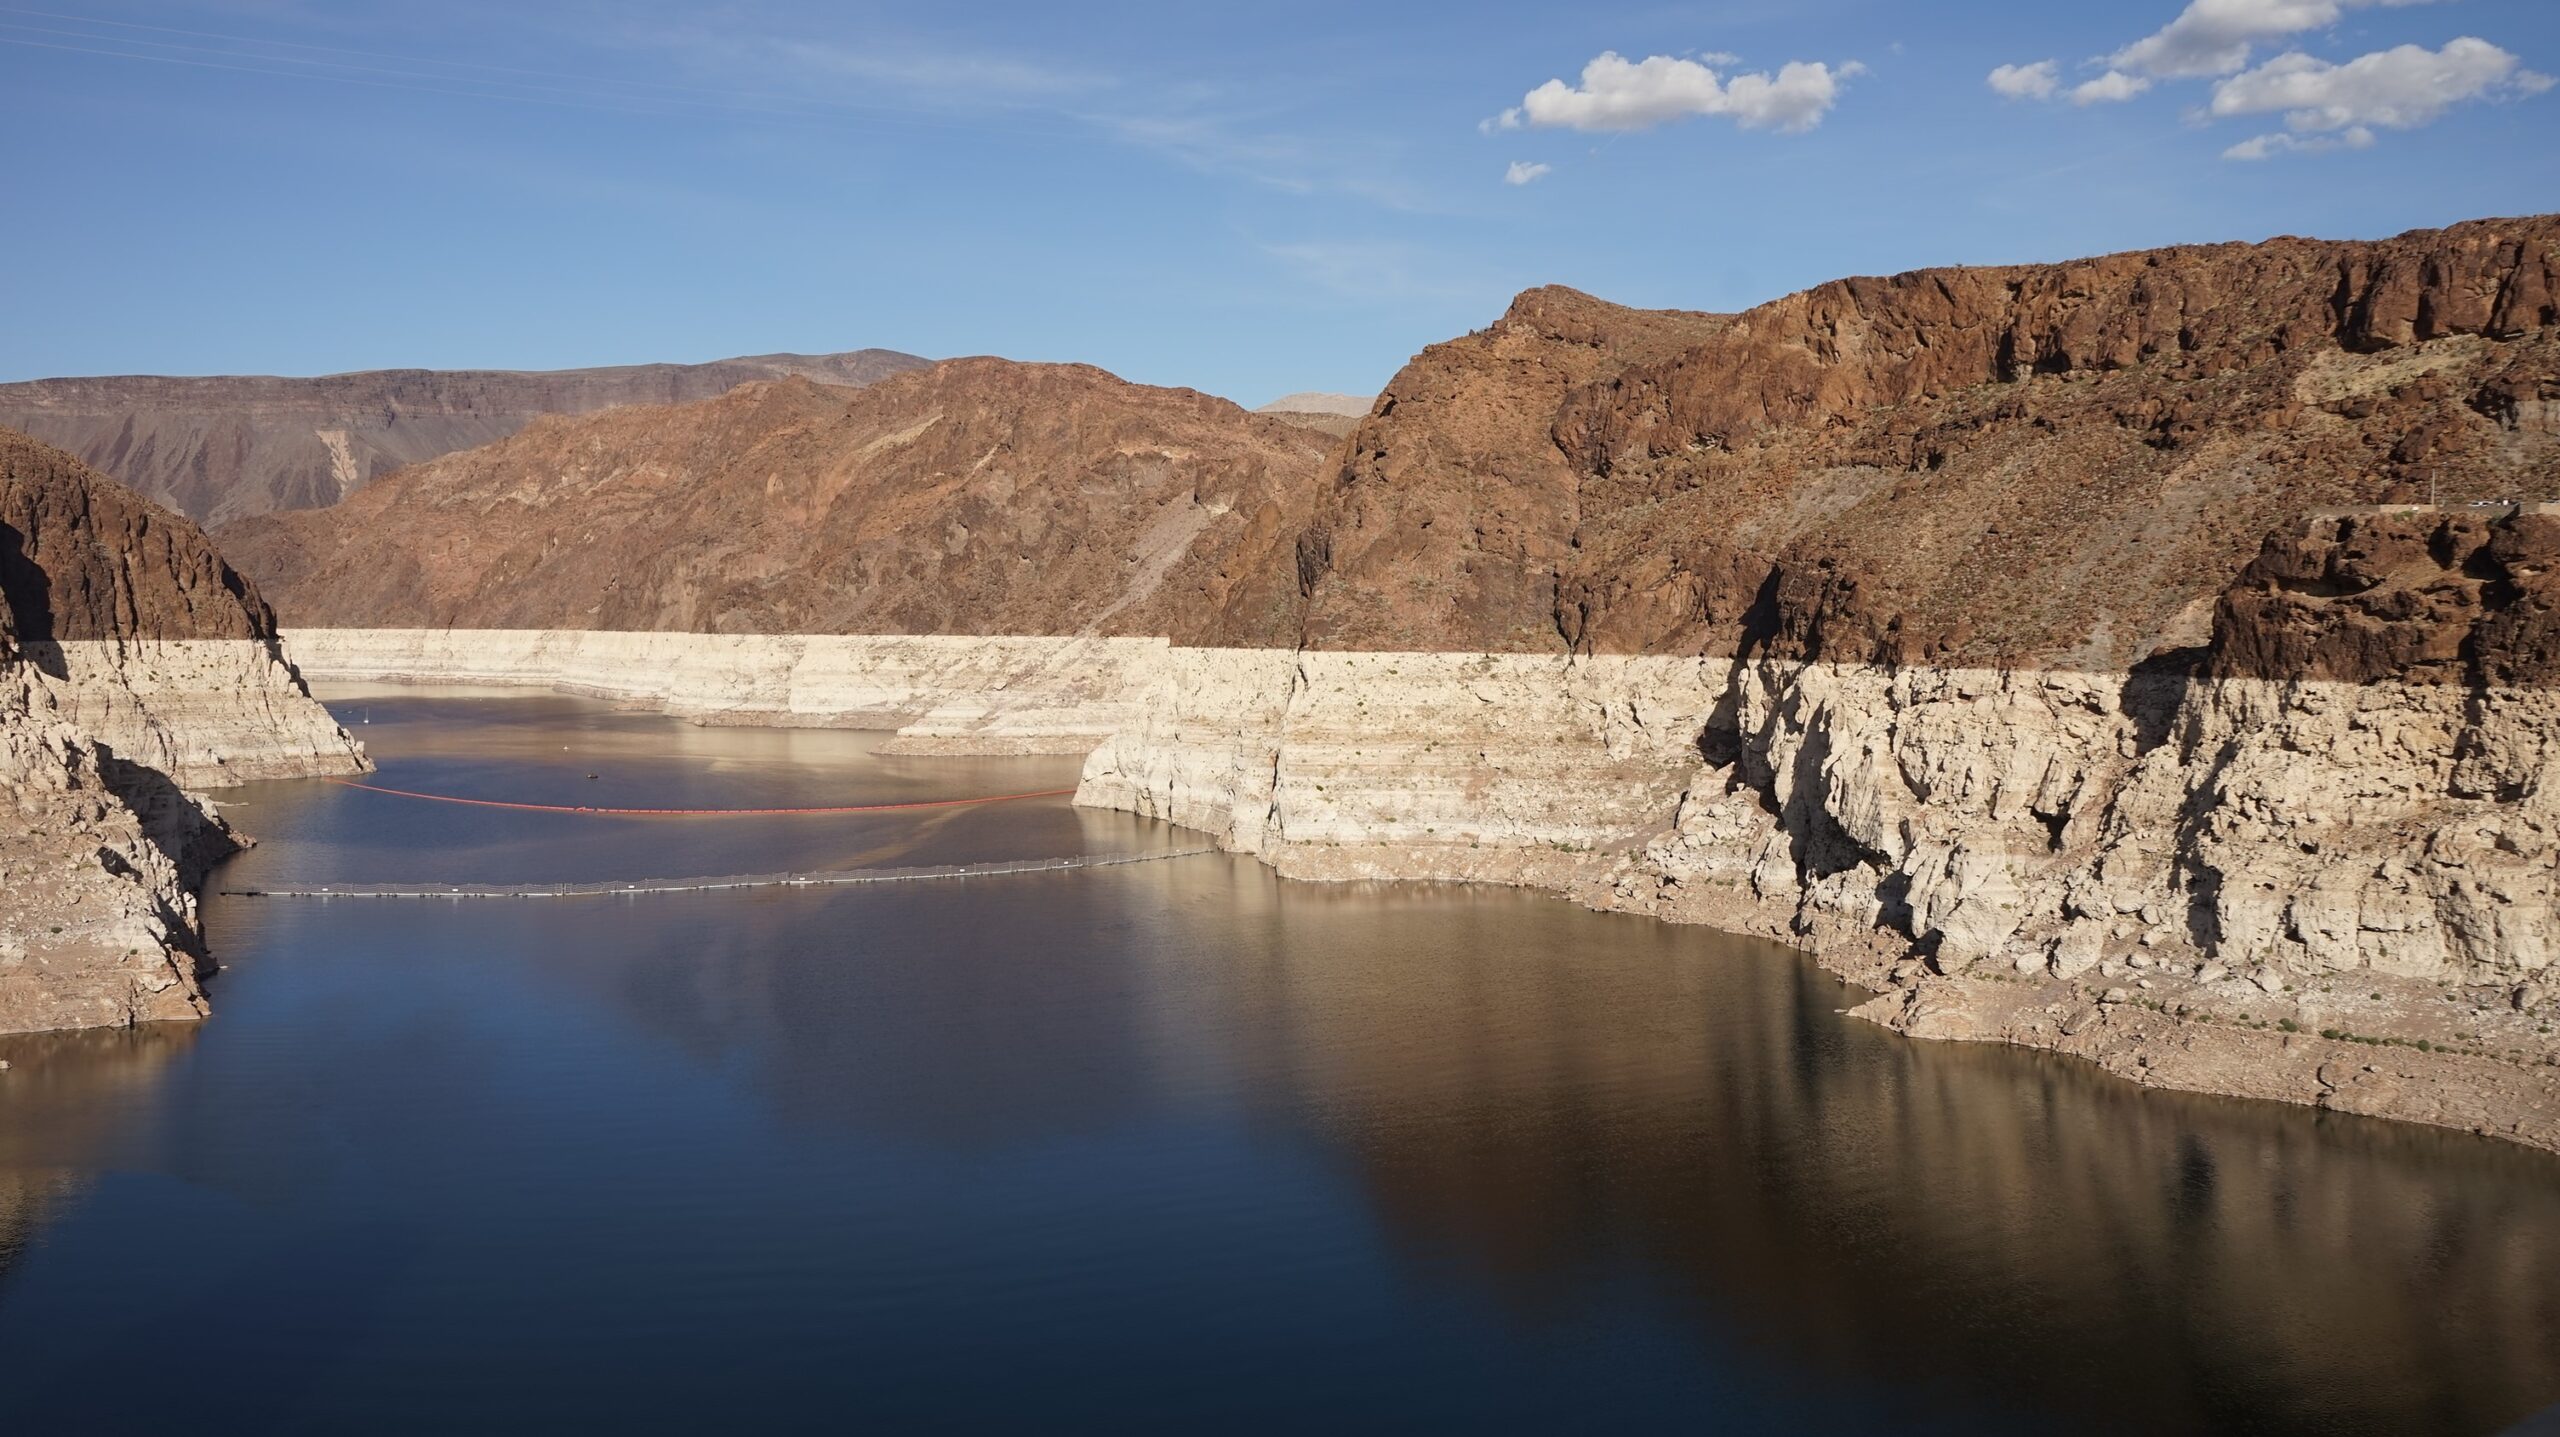 Biden Admin Proposes Drastic Cuts To Colorado River’s Water Usage Before It Runs Dry